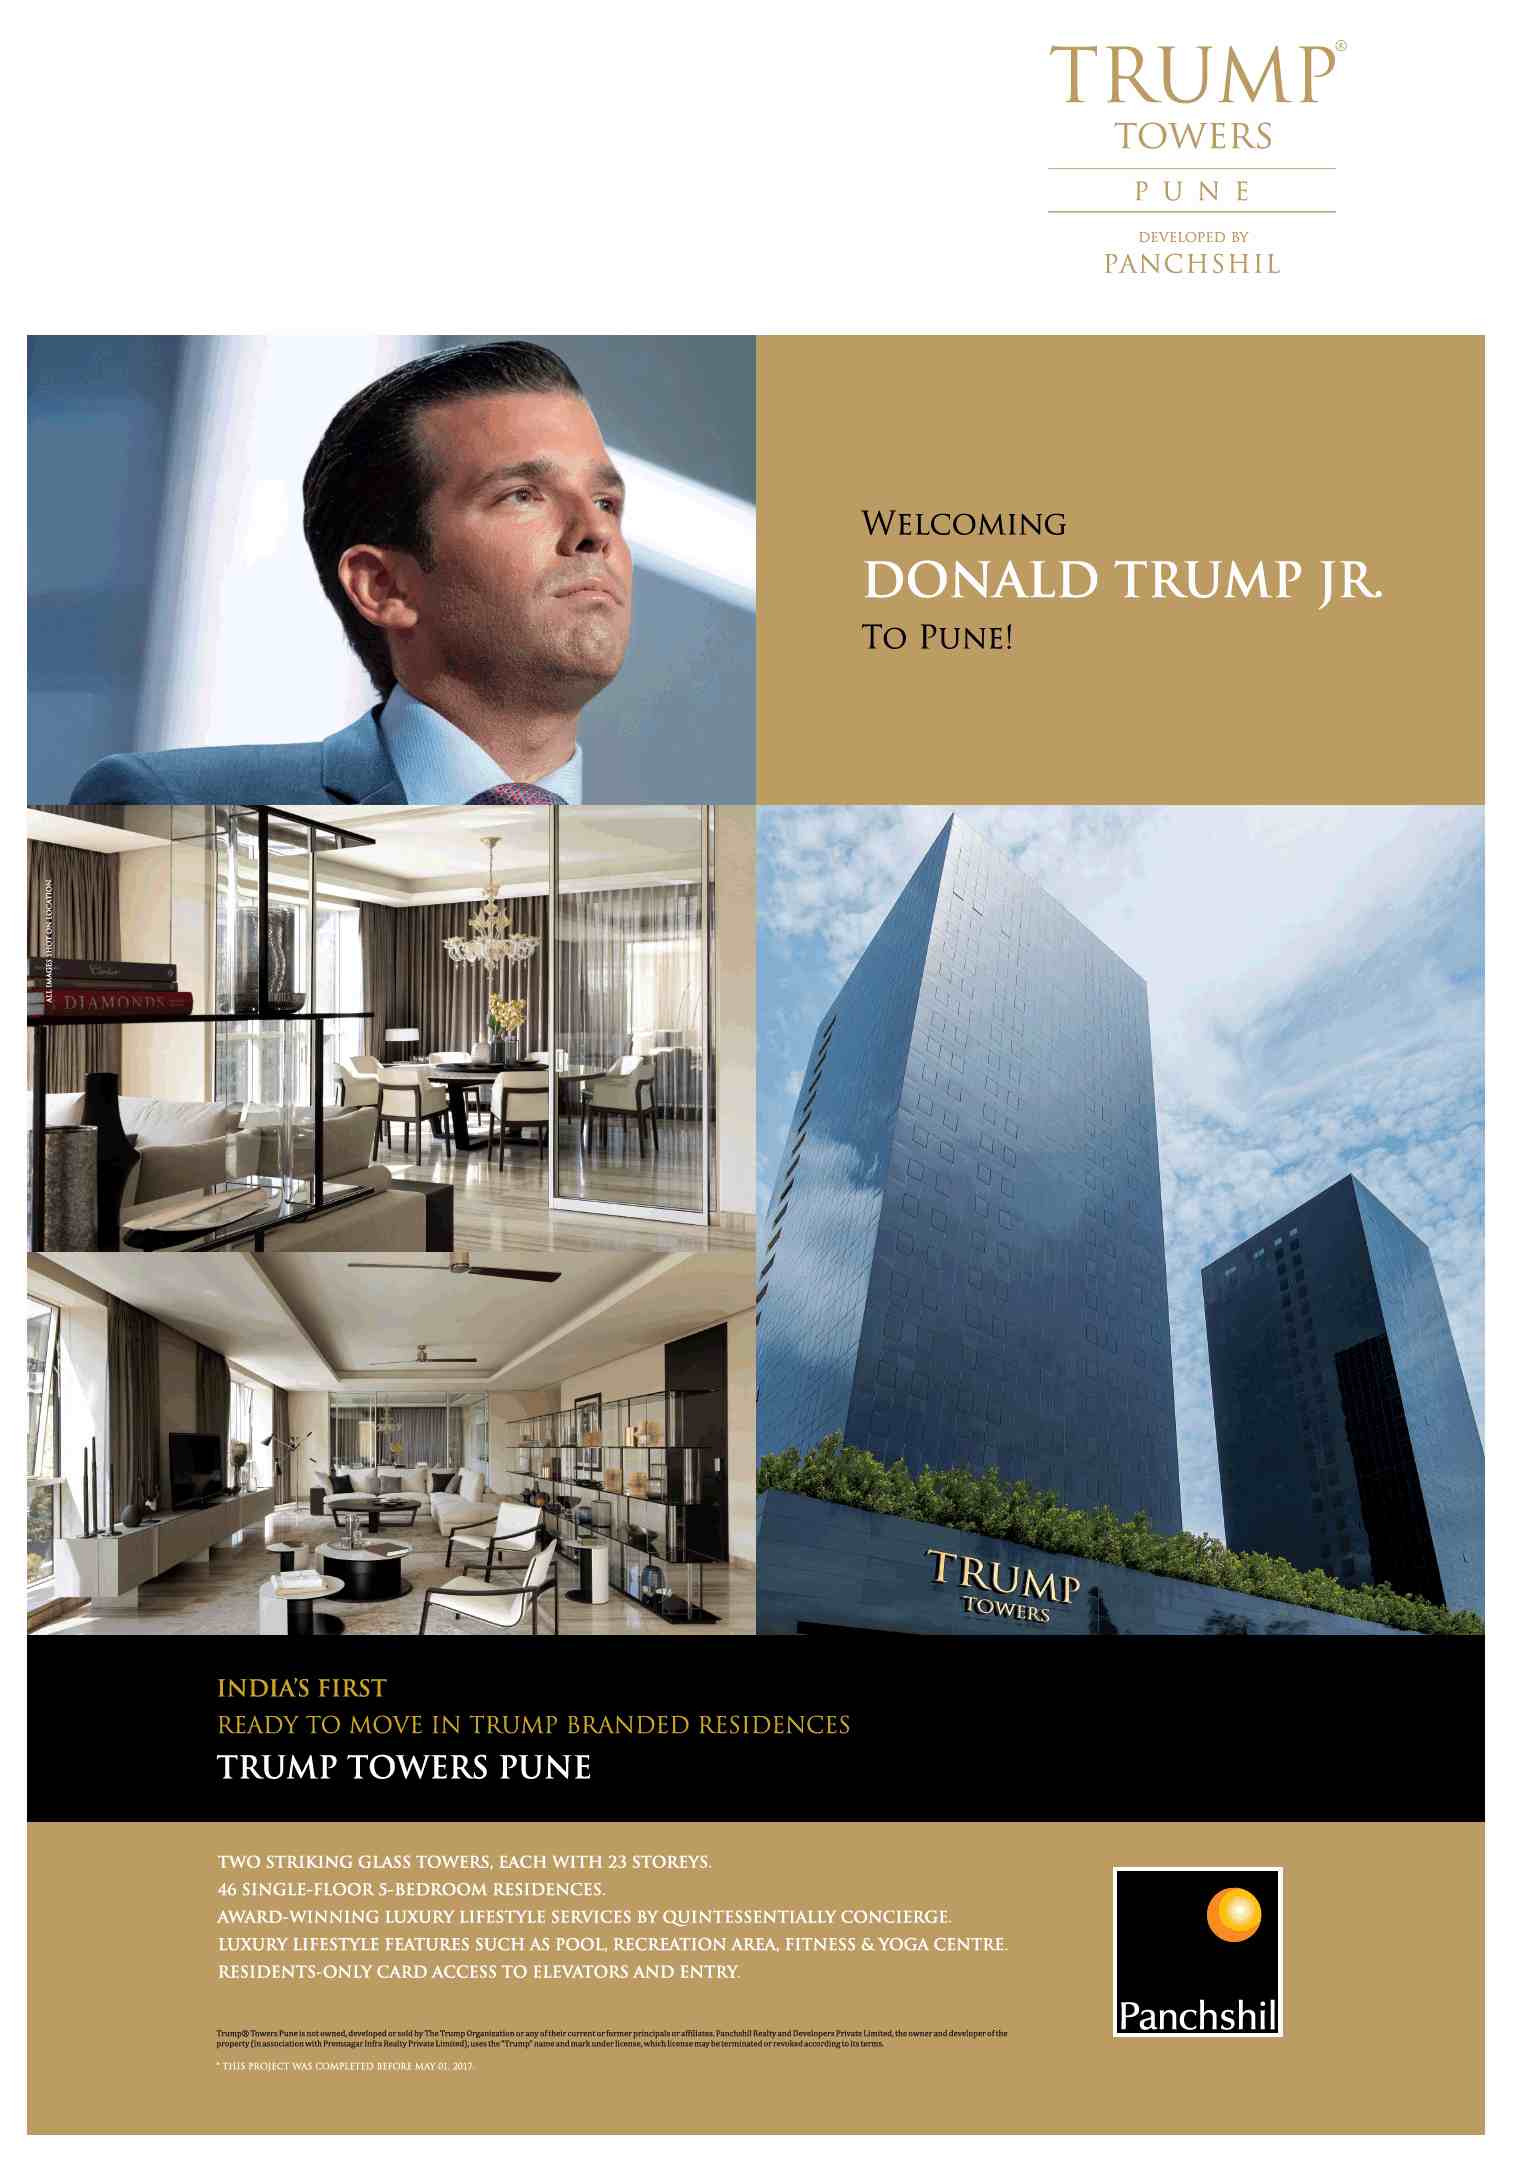 Panchshil Trump Towers India's first ready to move Trump branded residences in Pune